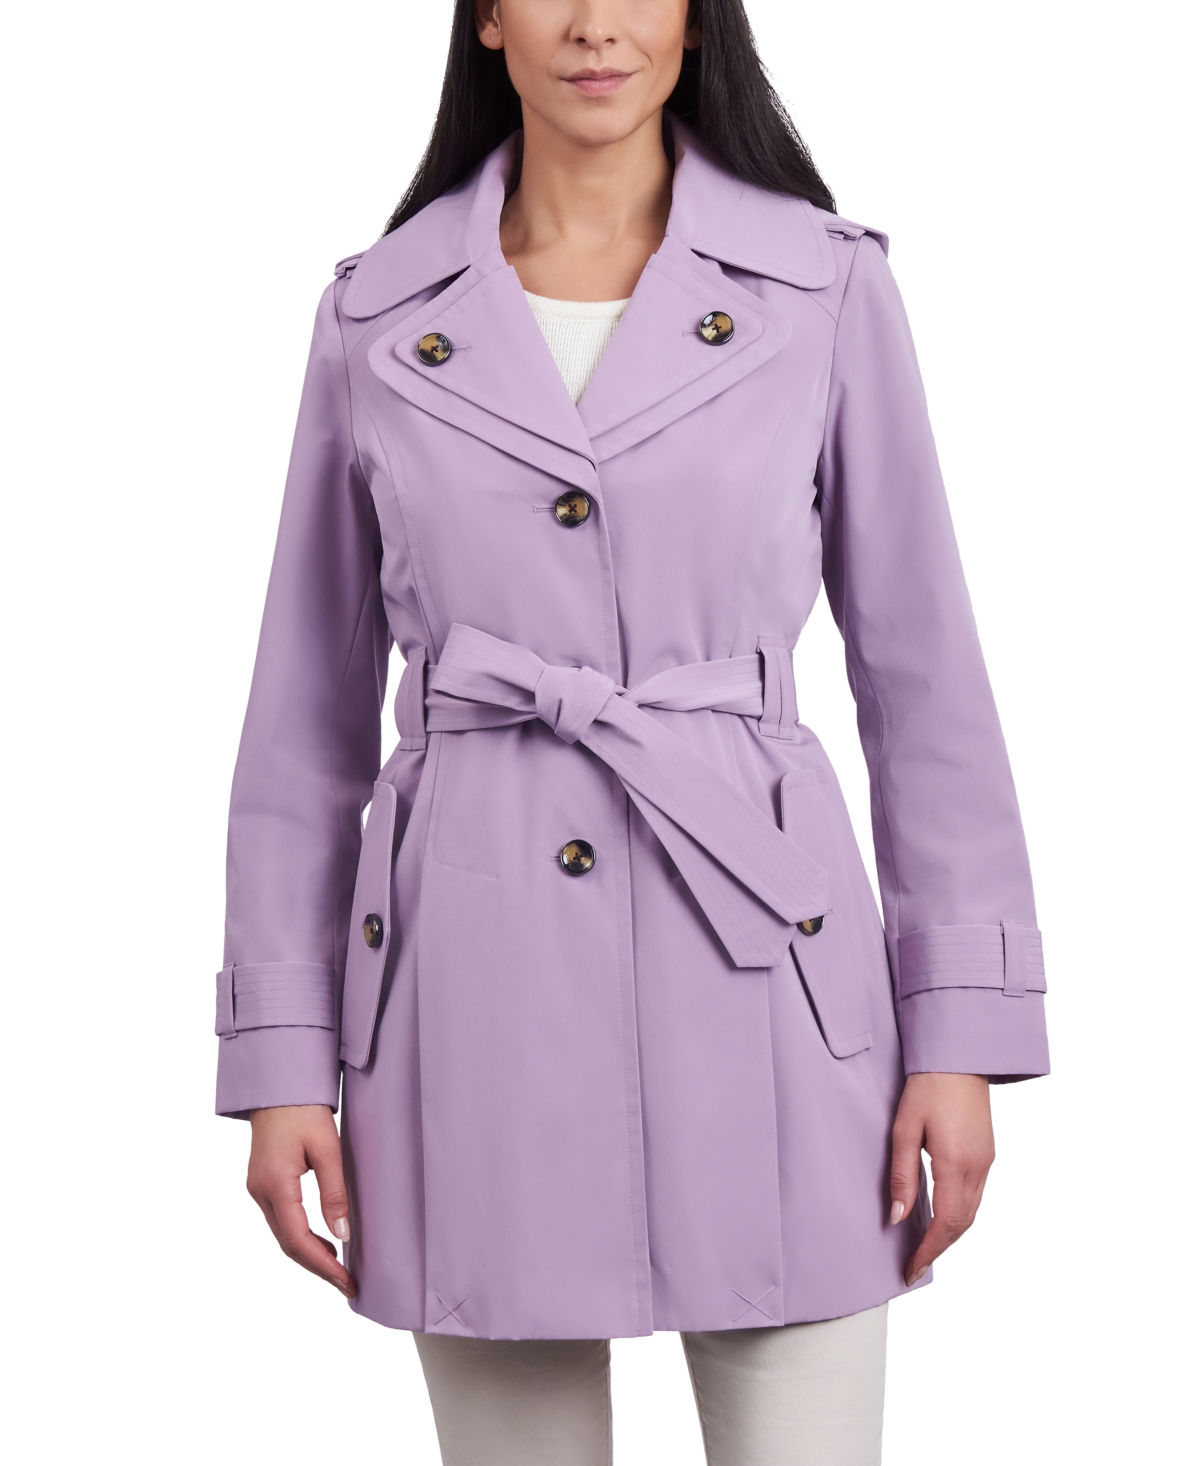 Women's Single-Breasted Hooded Belted Trench Coat - Green Tea